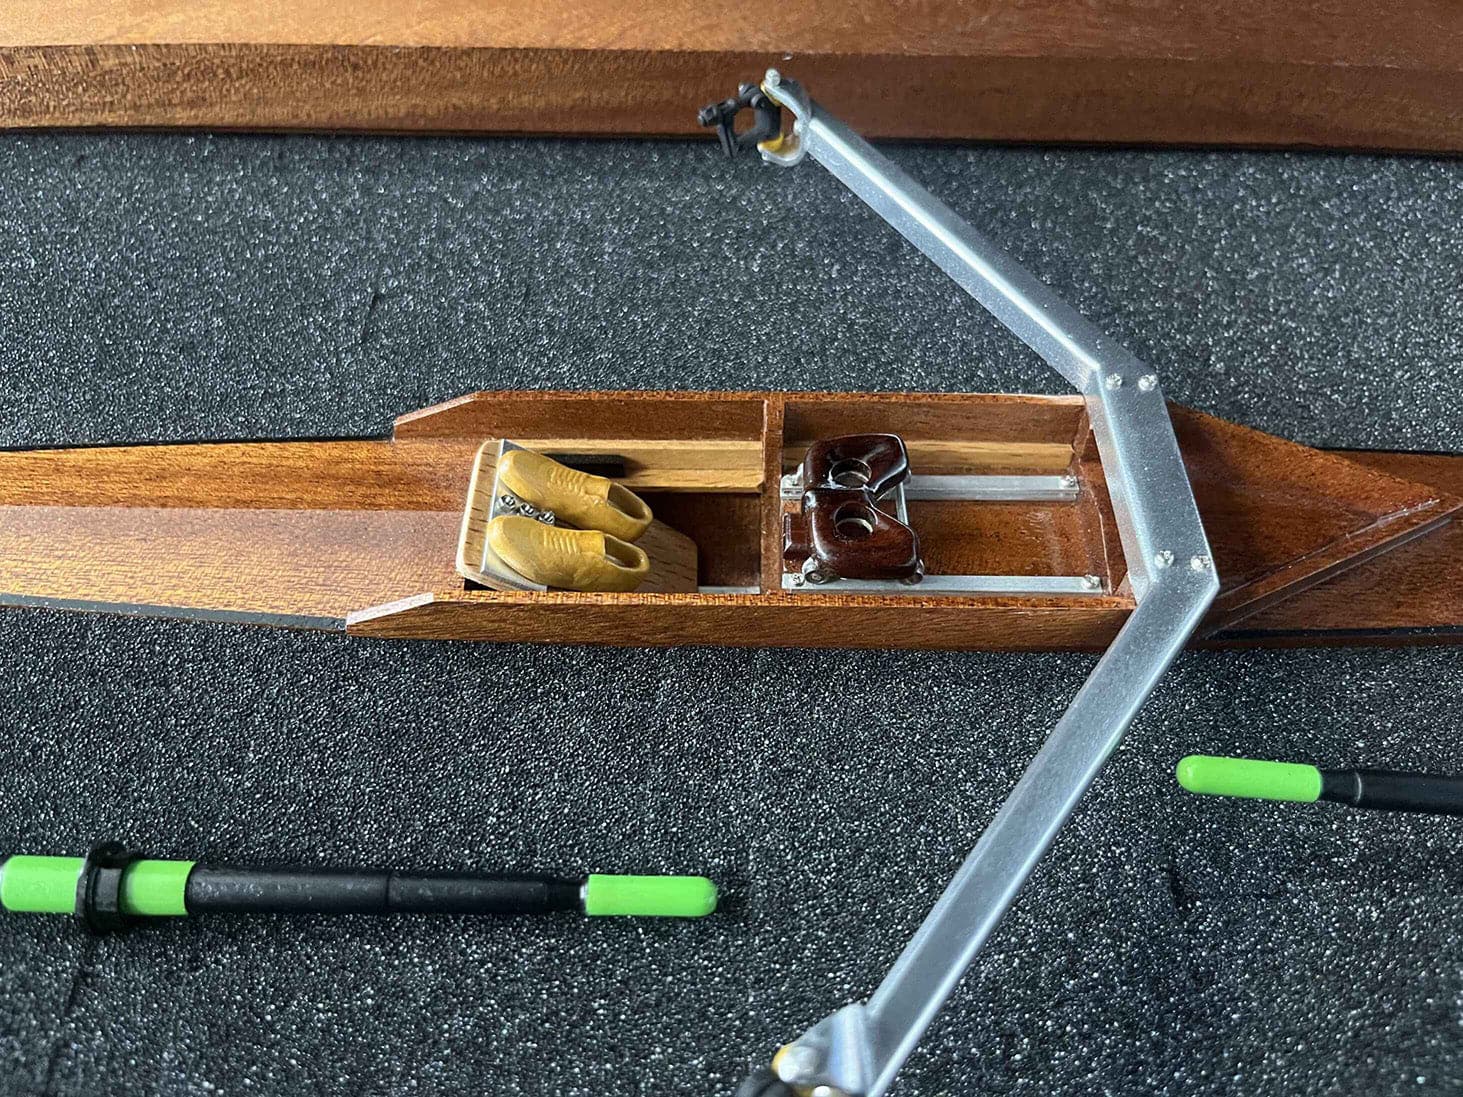 ZJ Handcrafted Wooden Rowing Boat Model Miniatures with Exquisite Gift Box